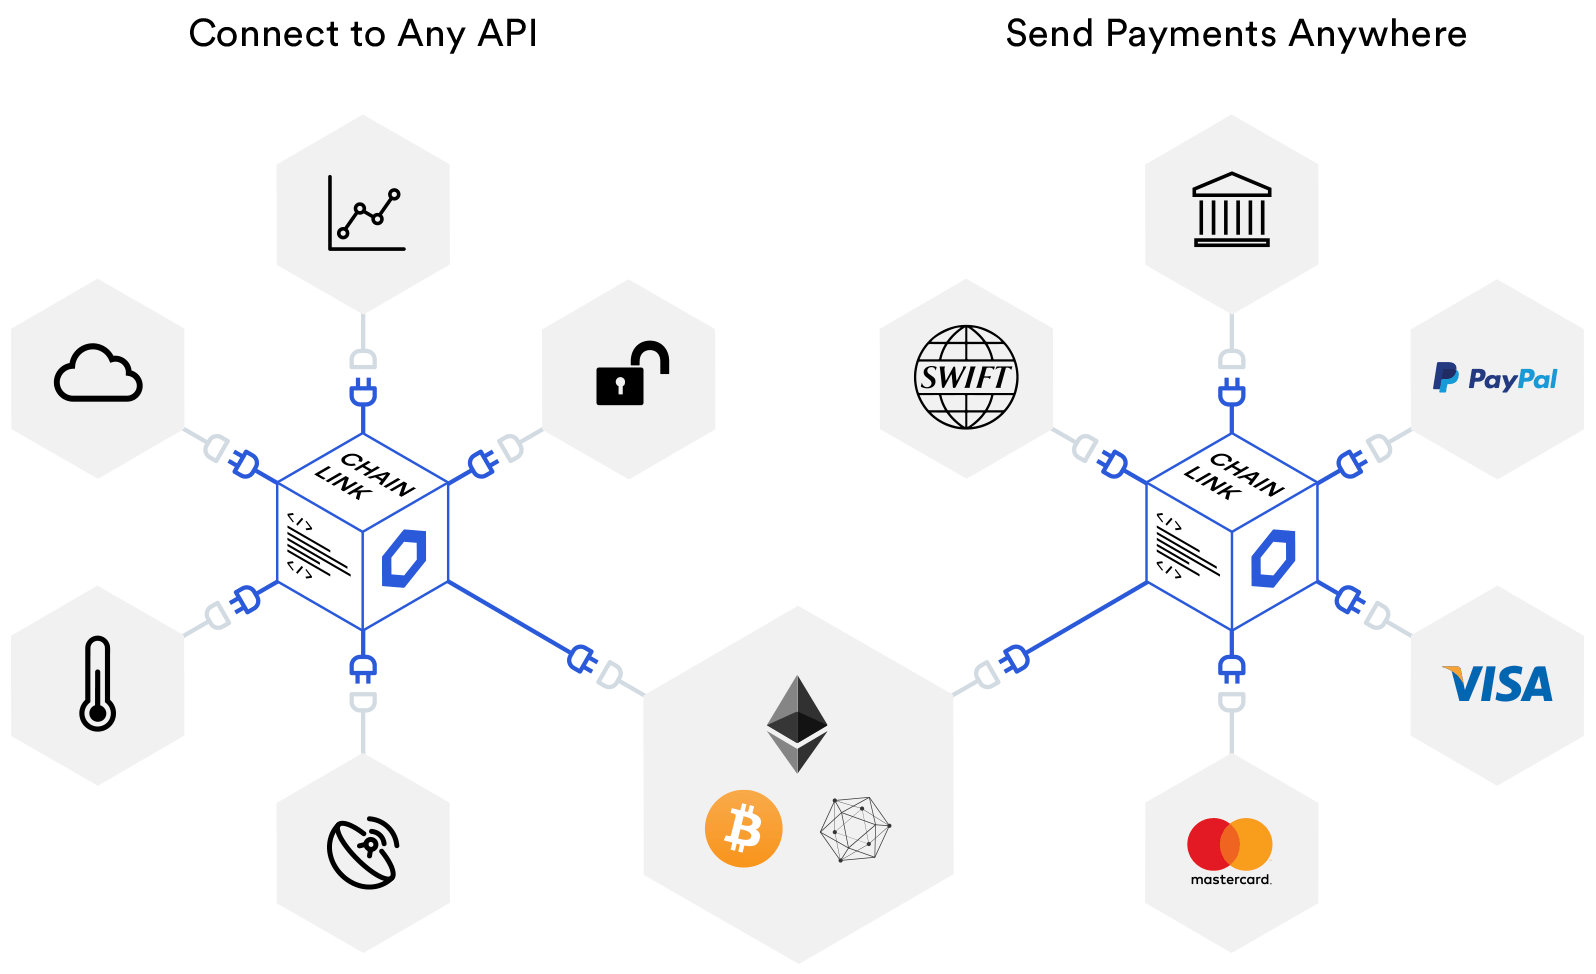 A diagram showing how Chainlink connects smart contracts on any blockchain to any input and output they need to replicate a full contract life cycle